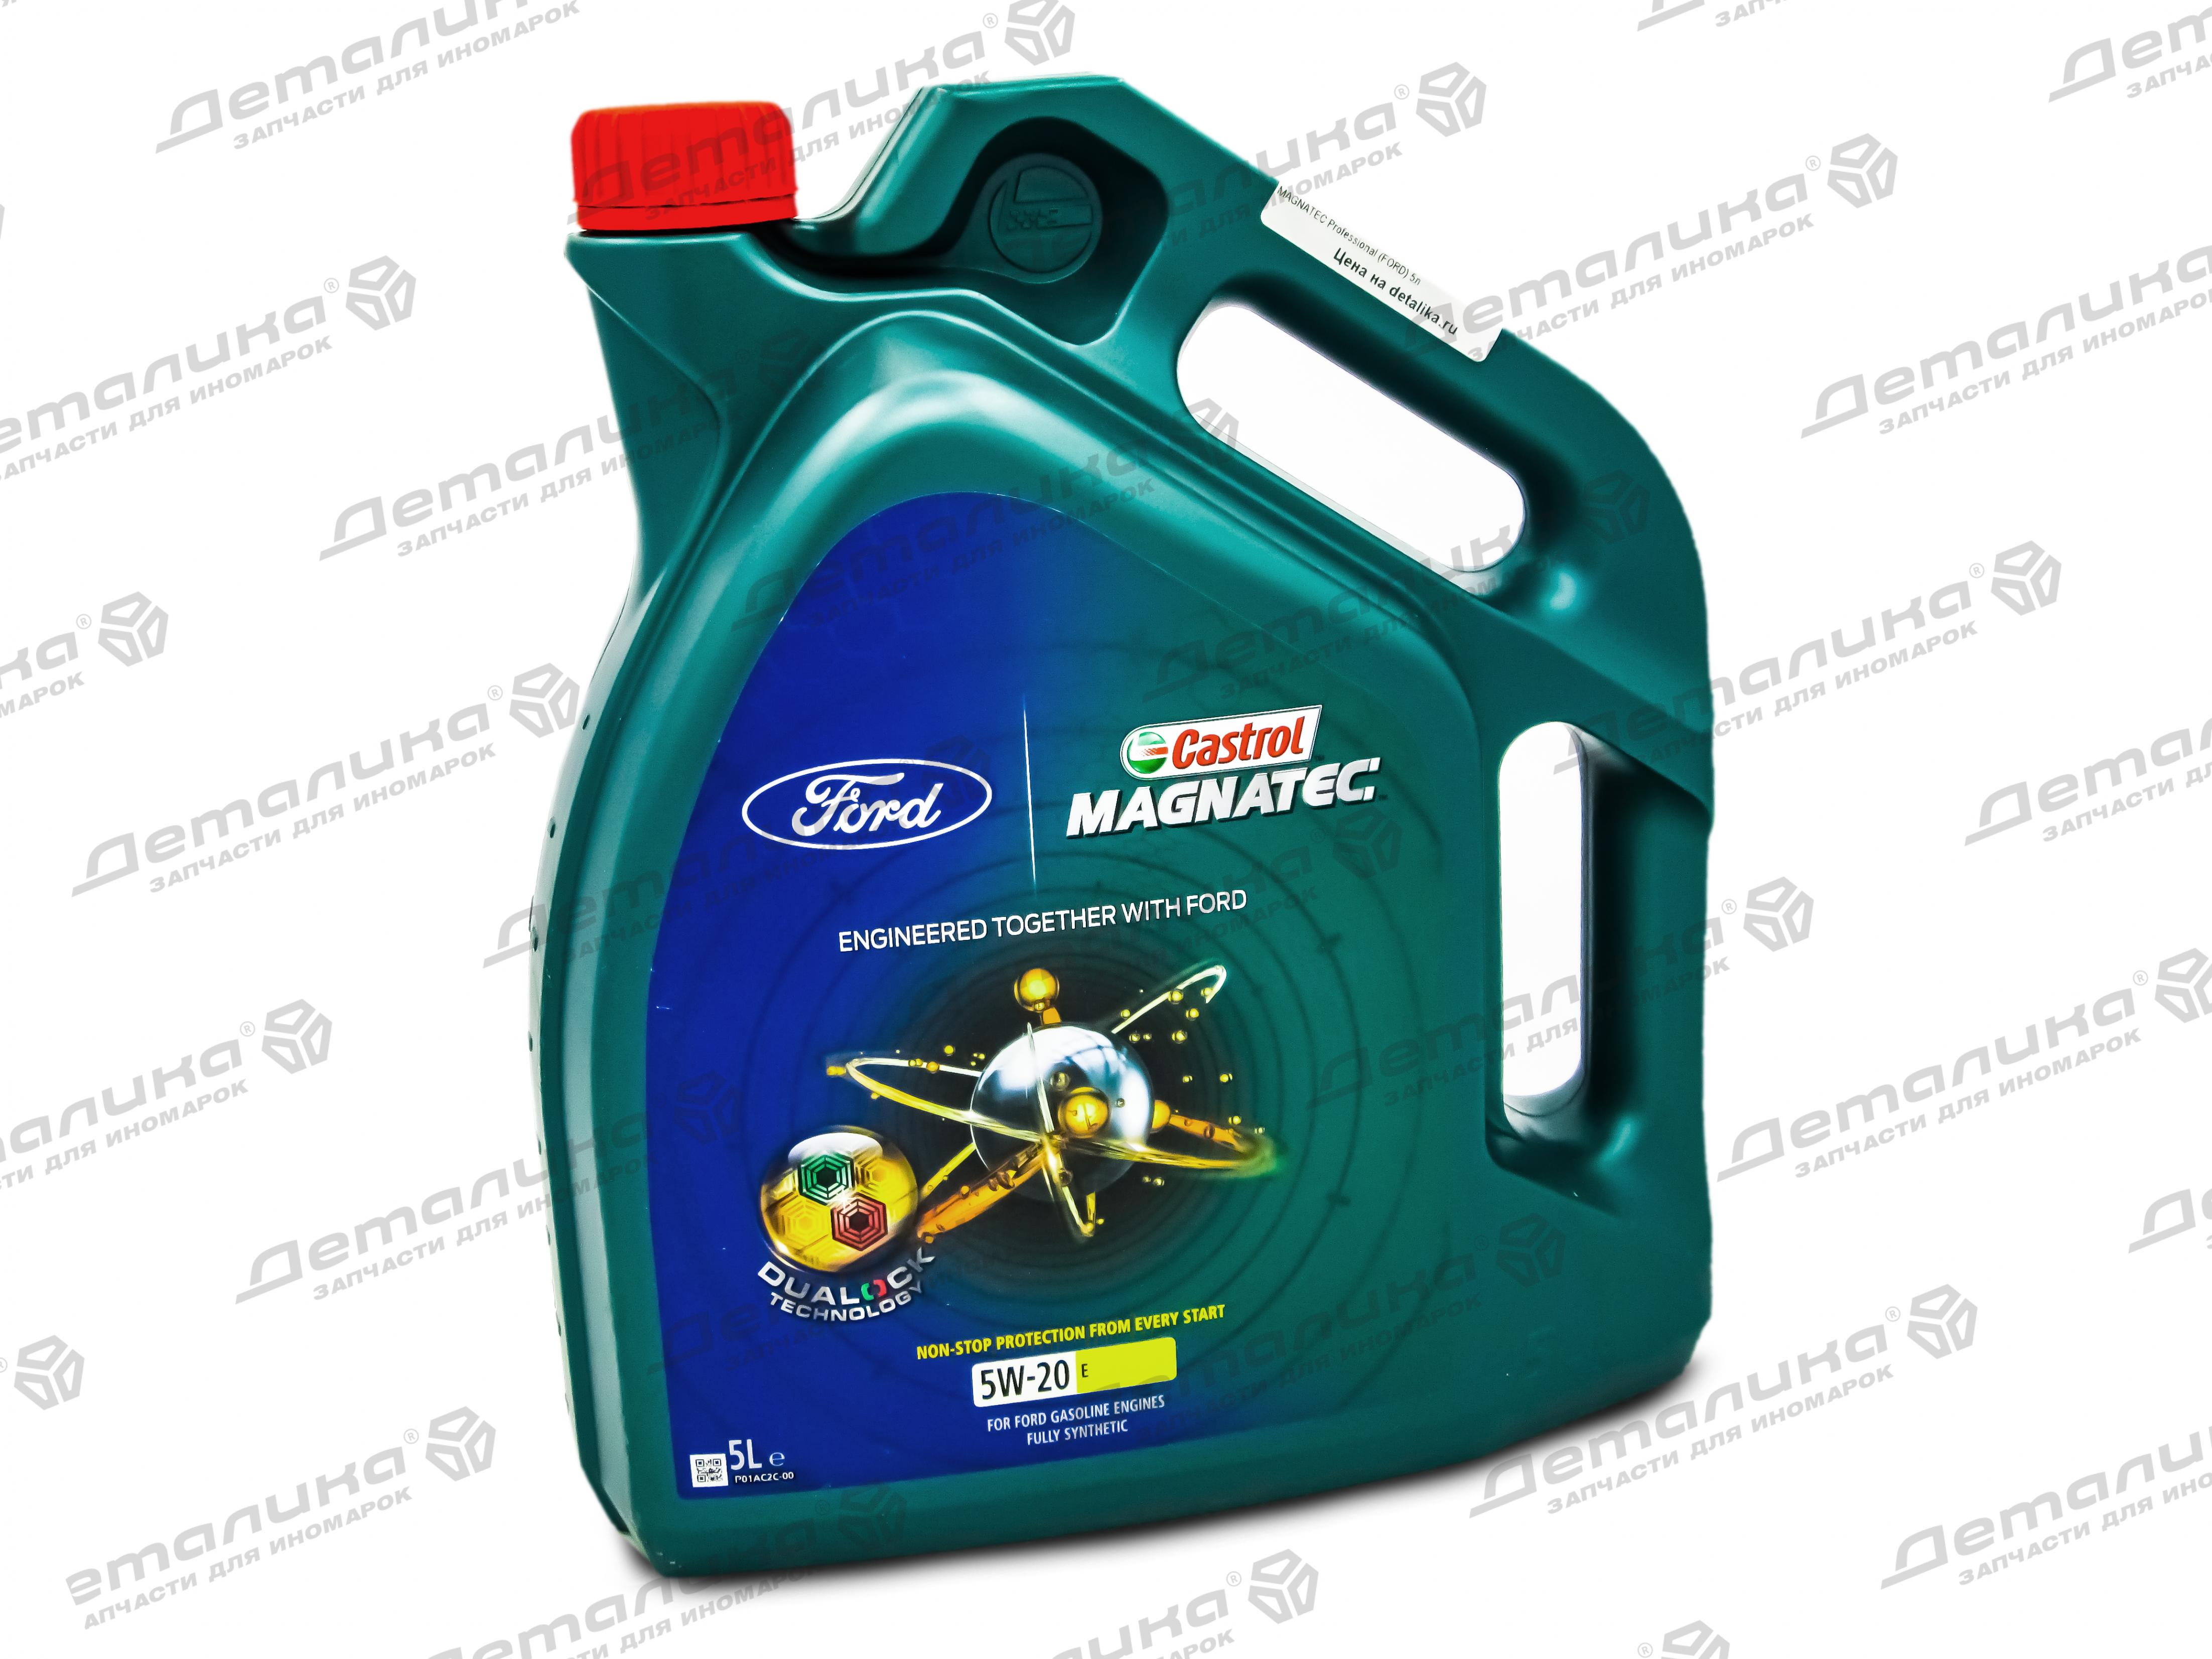 Масло кастрол а5. Ford Castrol Magnatec professional a5 5w-30. Castrol Magnatec 5w30 a5 Ford. Ford Castrol Magnatec professional 5w30. Castrol Magnatec professional a5 5w-30 5 л Ford.